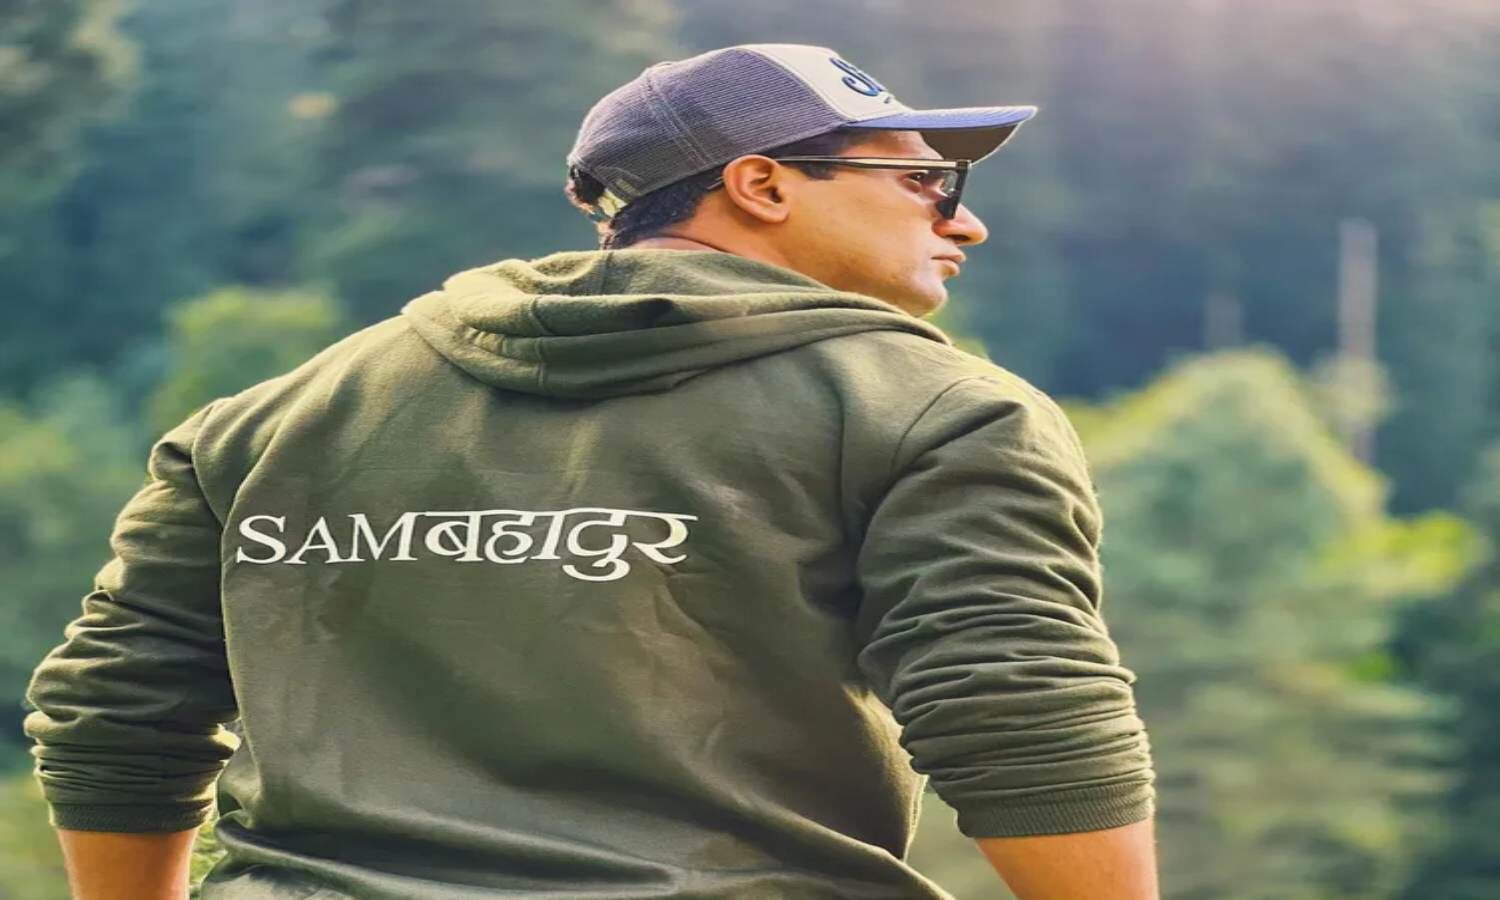 Vicky Kaushal in his film "Sam Bahadur" shared a picture from the hills wearing a hoodie